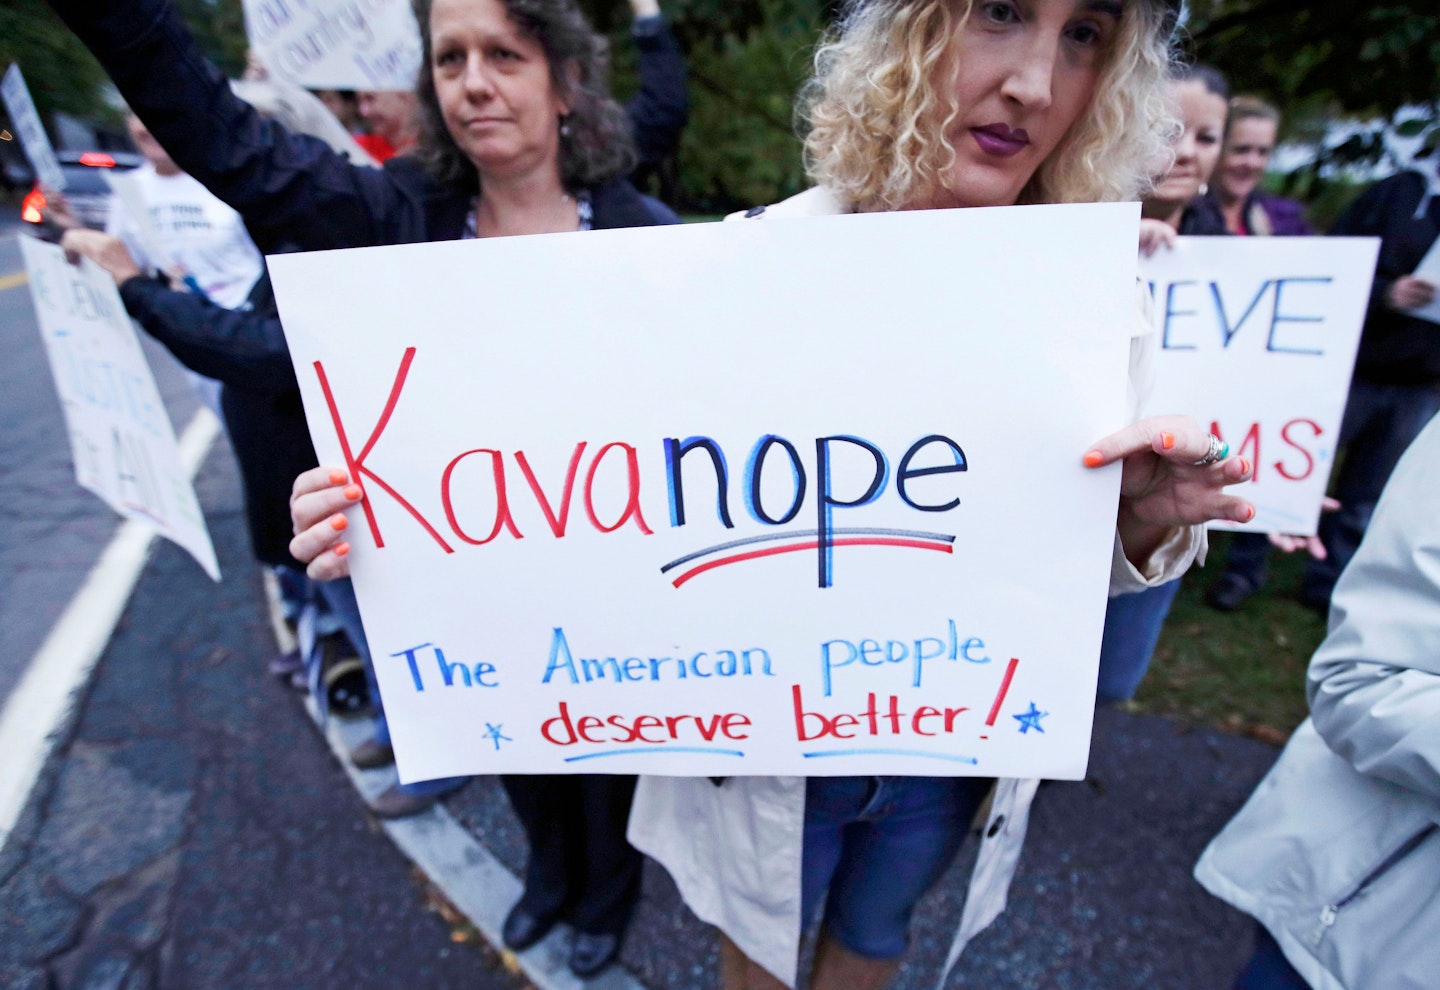 People protesting against Judge Brett Kavanaugh, who has been accused of sexual assault. He denies the allegations